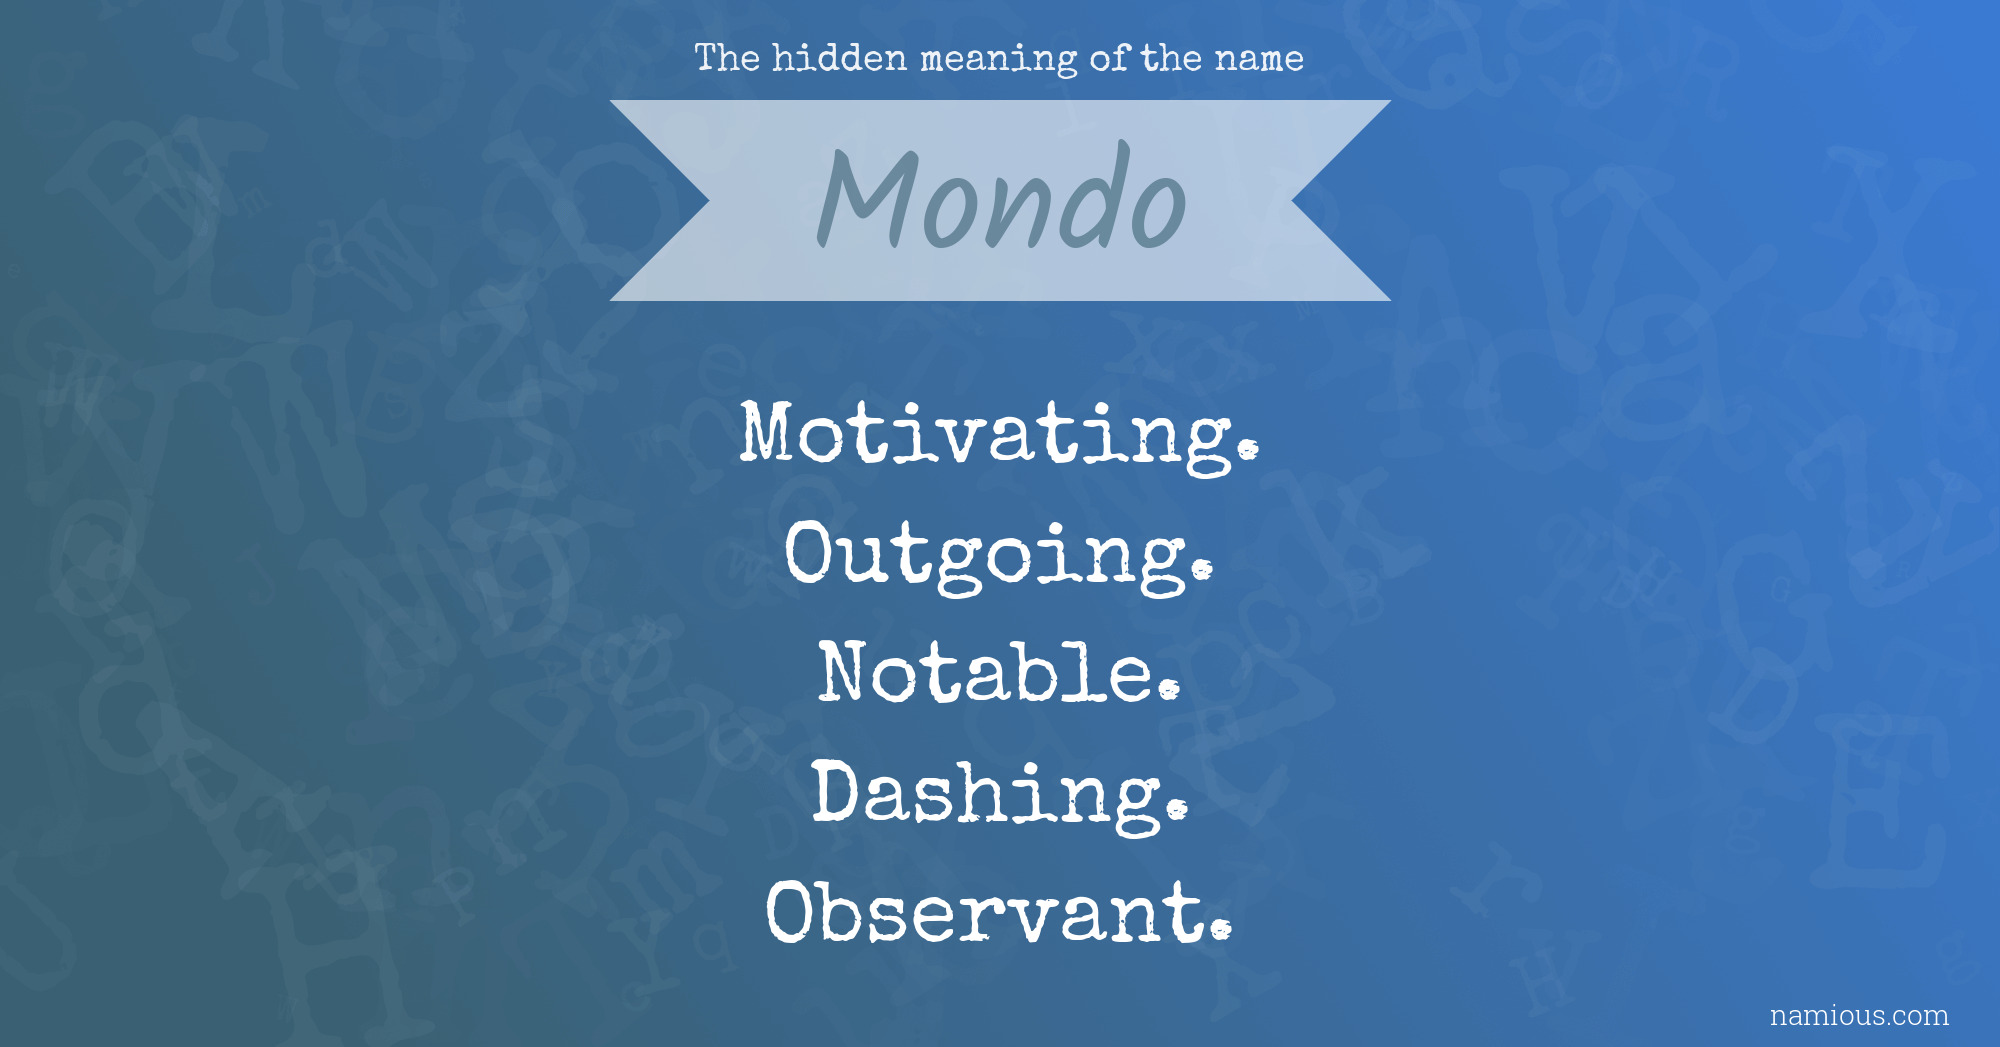 The hidden meaning of the name Mondo